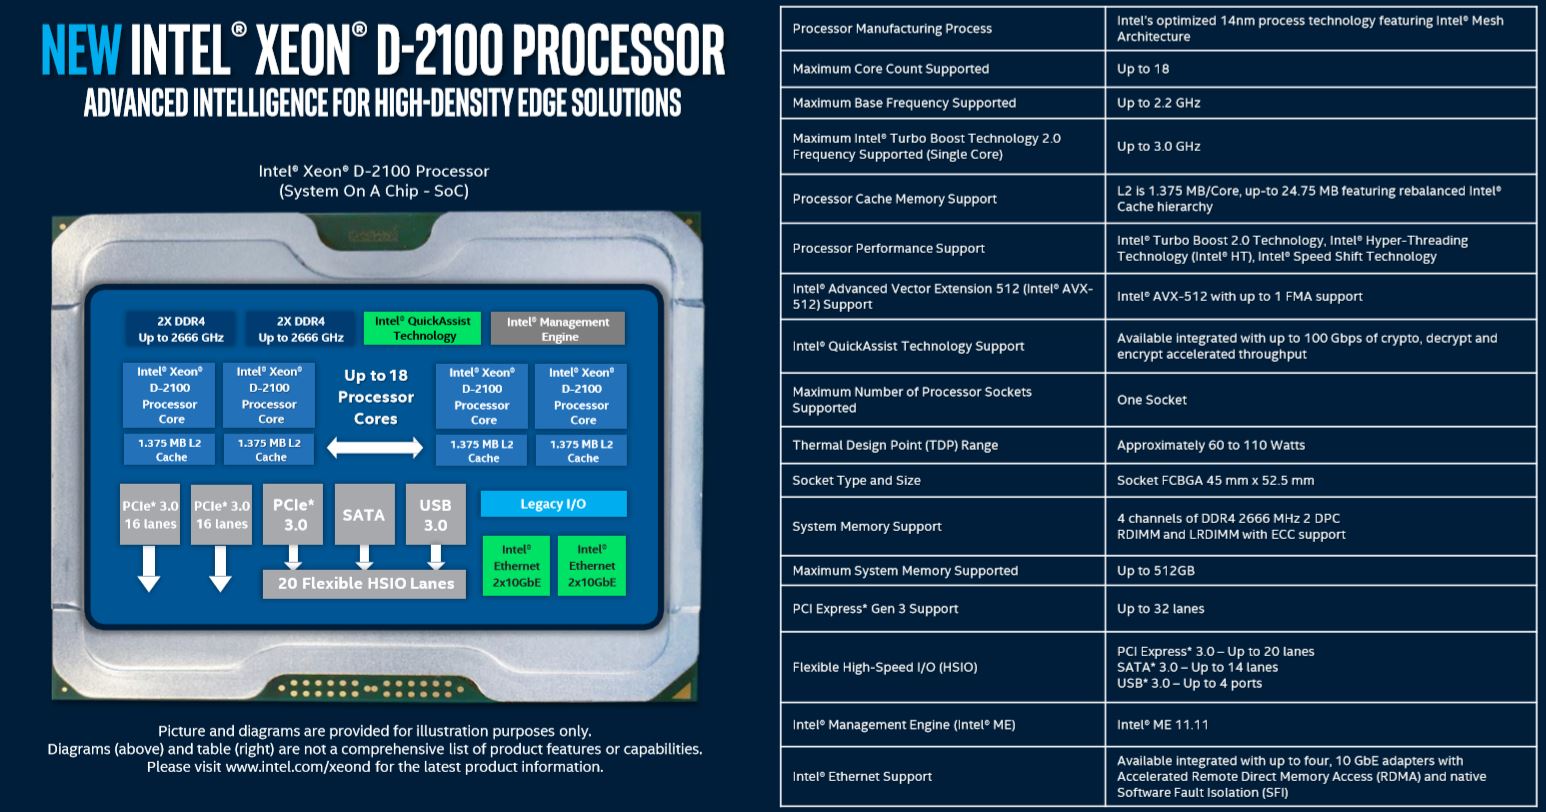 Intel Xeon D 2100 Architecture Highlights